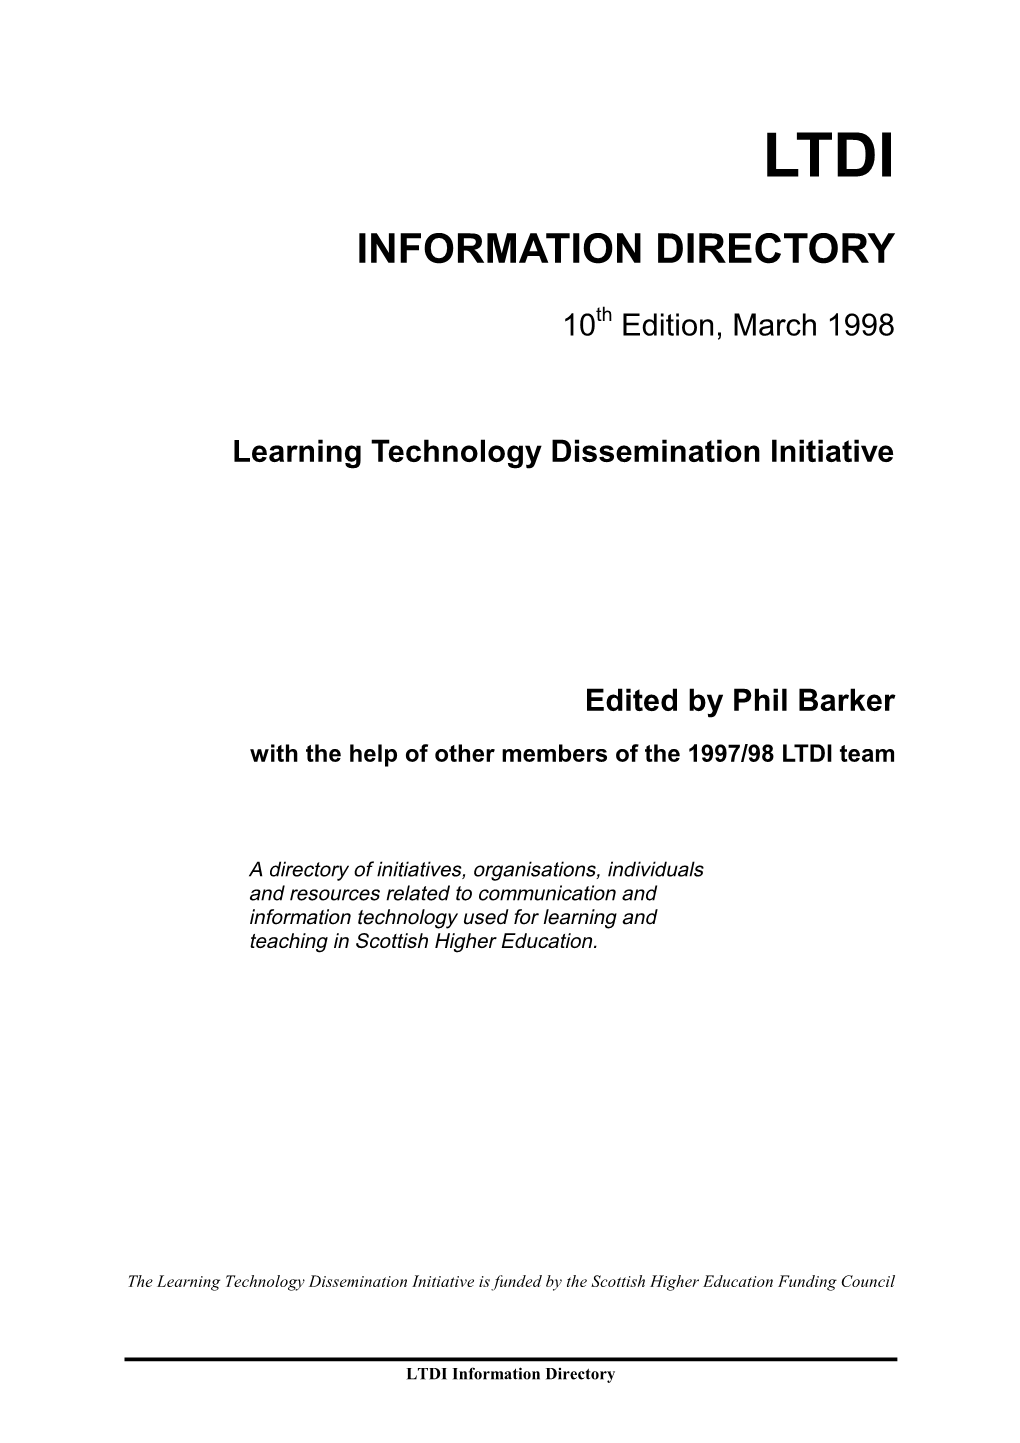 Information Directory